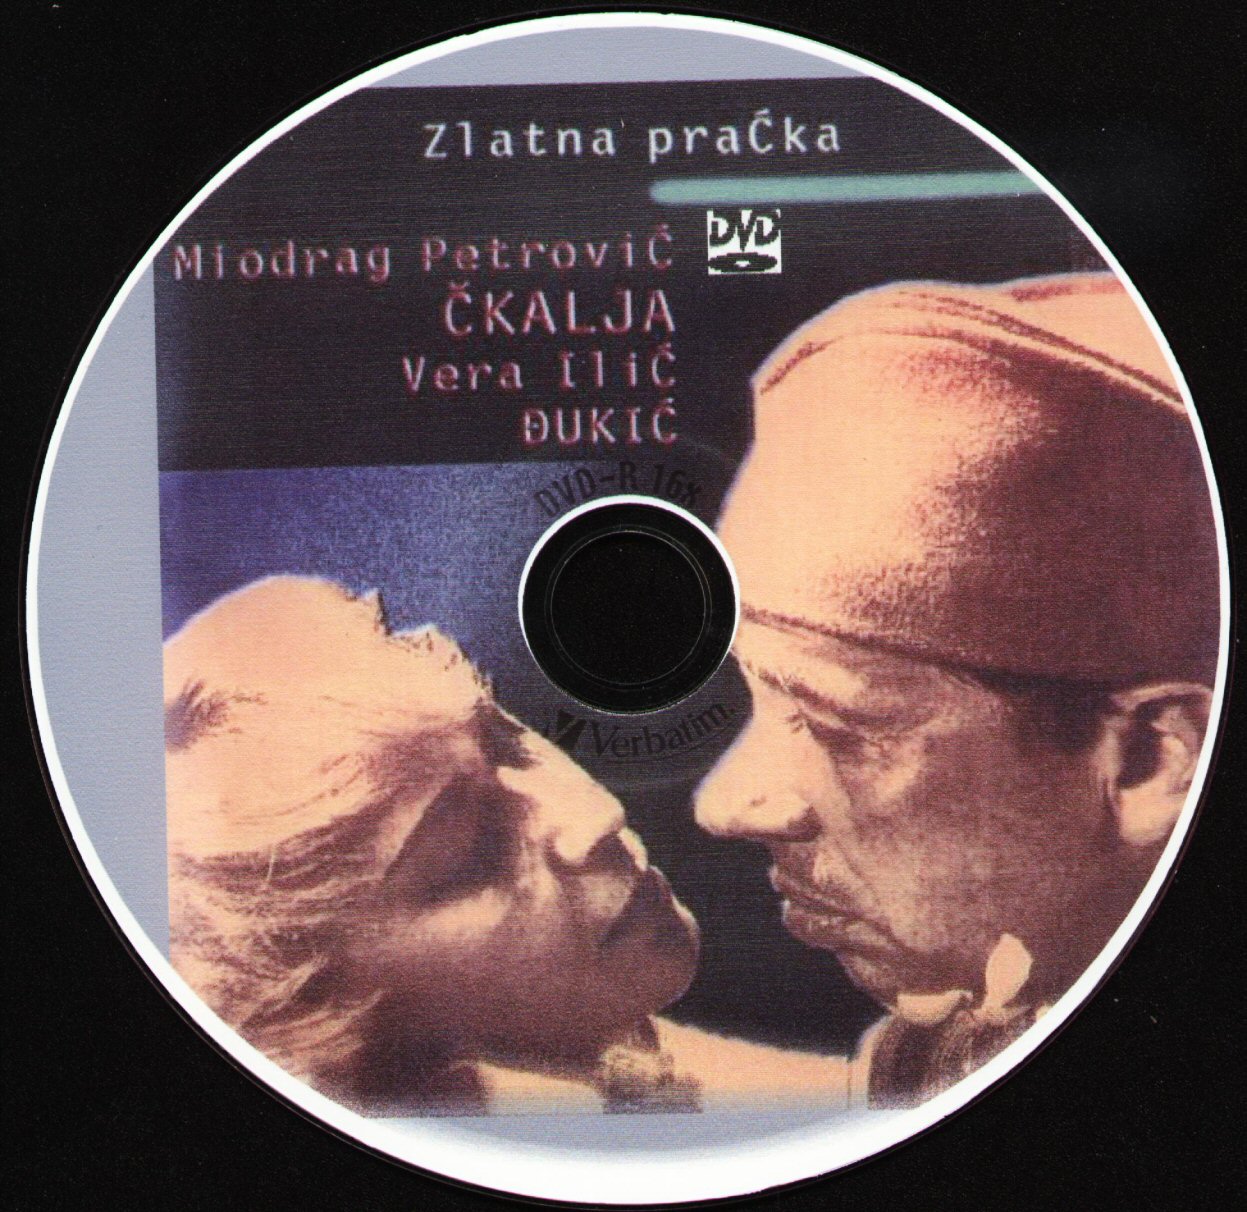 Click to view full size image -  DVD Cover - 0-9 - DVD - ZLATNA PRACKA - CD - DVD - ZLATNA PRACKA - CD.JPG